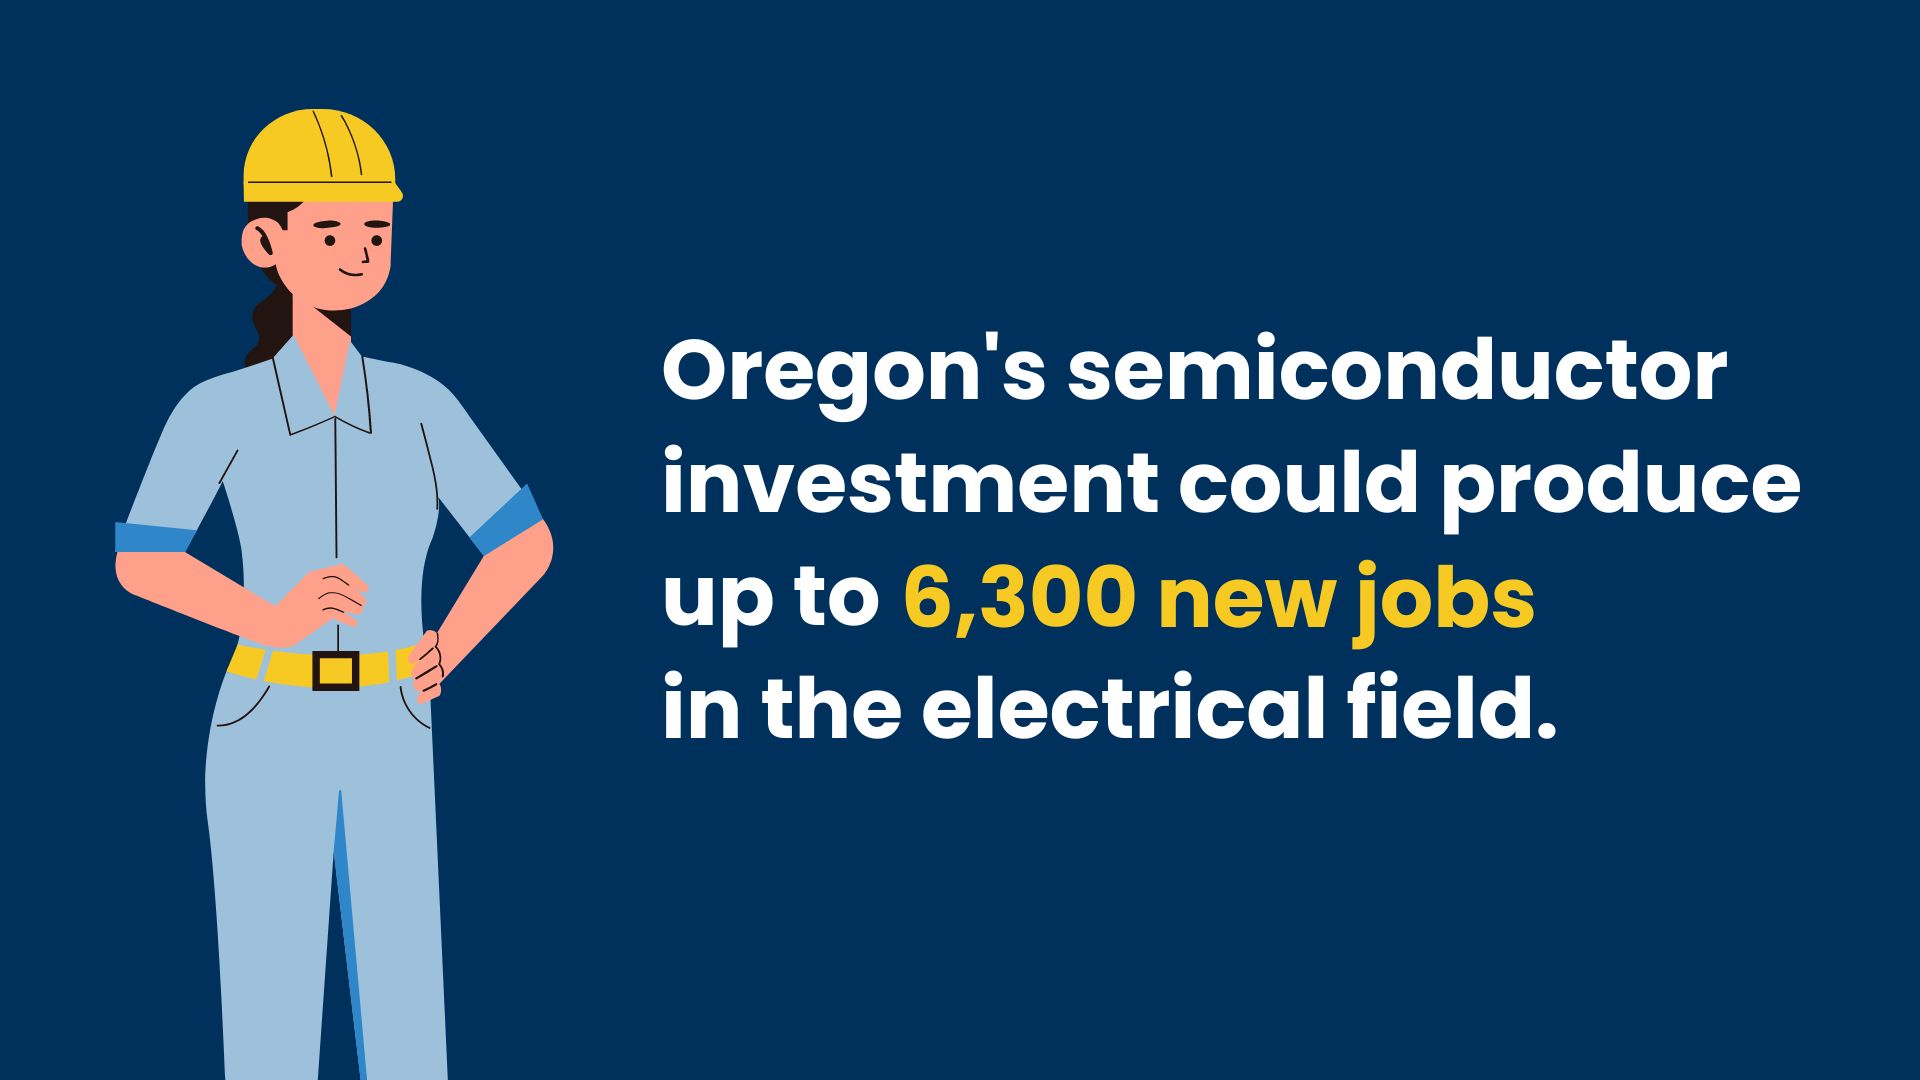 Oregon officials announced an expected $40 billion in semiconductor investment, which could produce up to 6,300 new jobs in the electrical field.